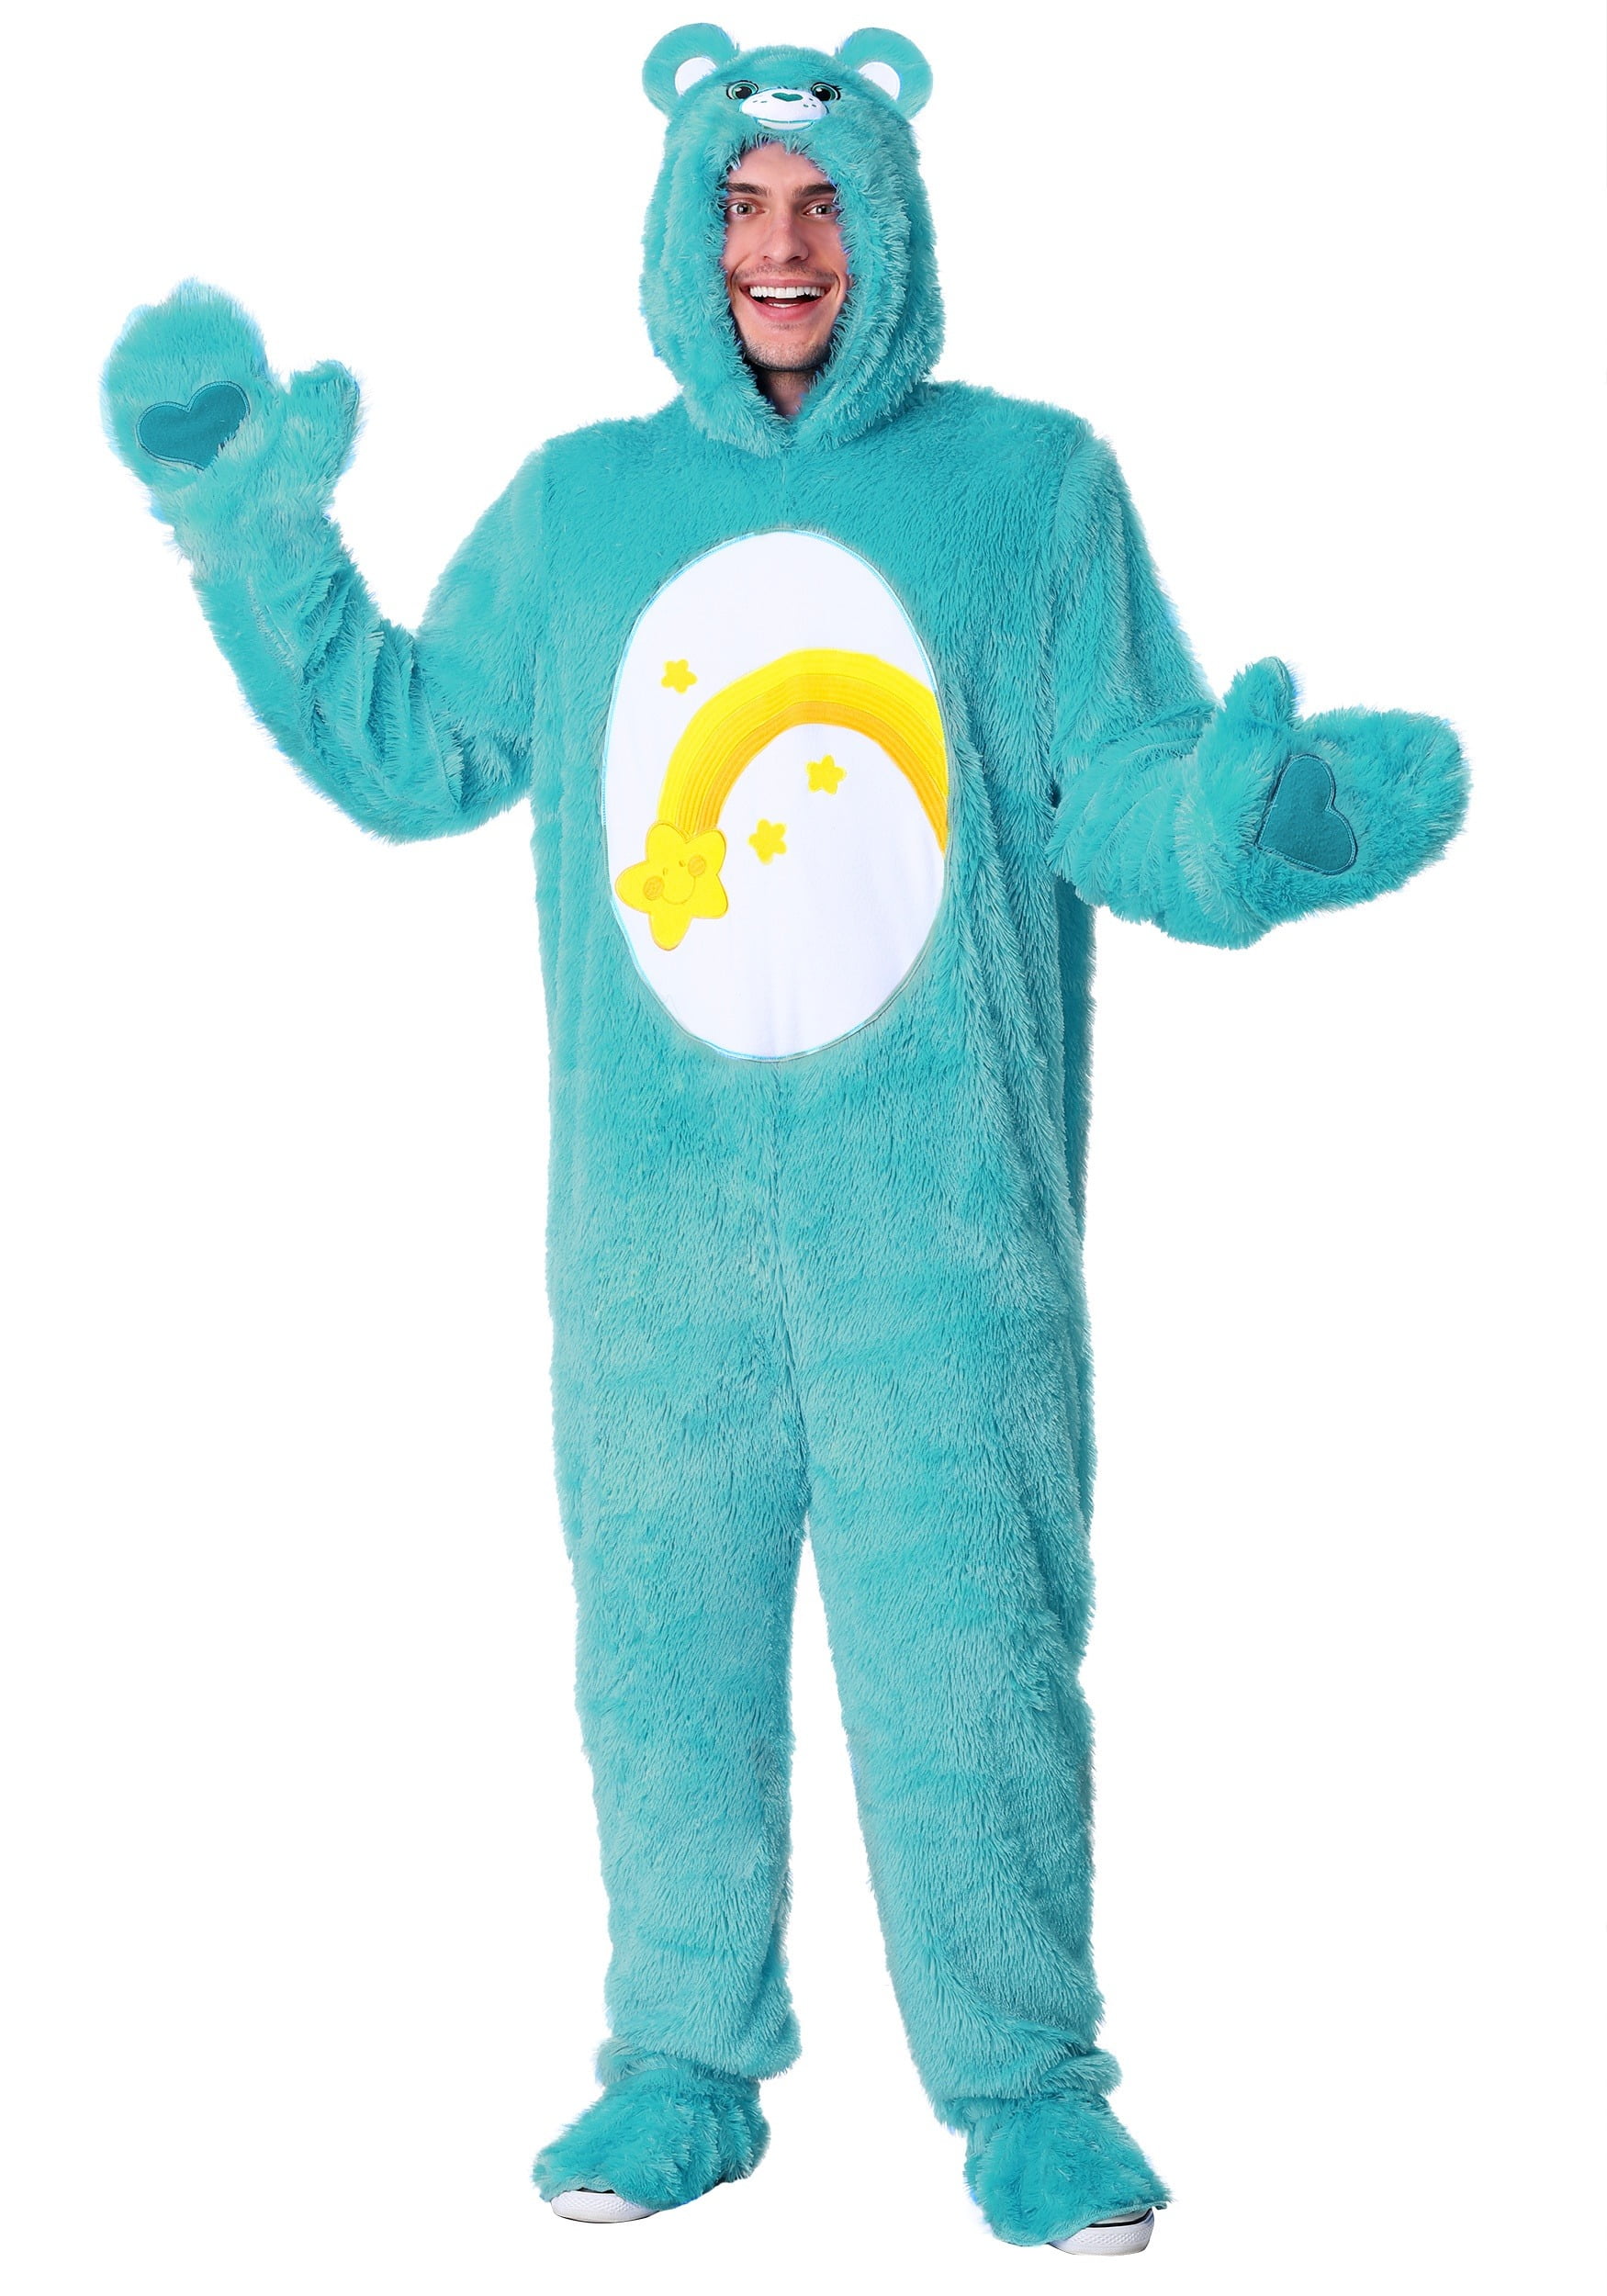 Bedtime Bear Costume for Adult size S Care Bears New by Disguise 40340 4-6 